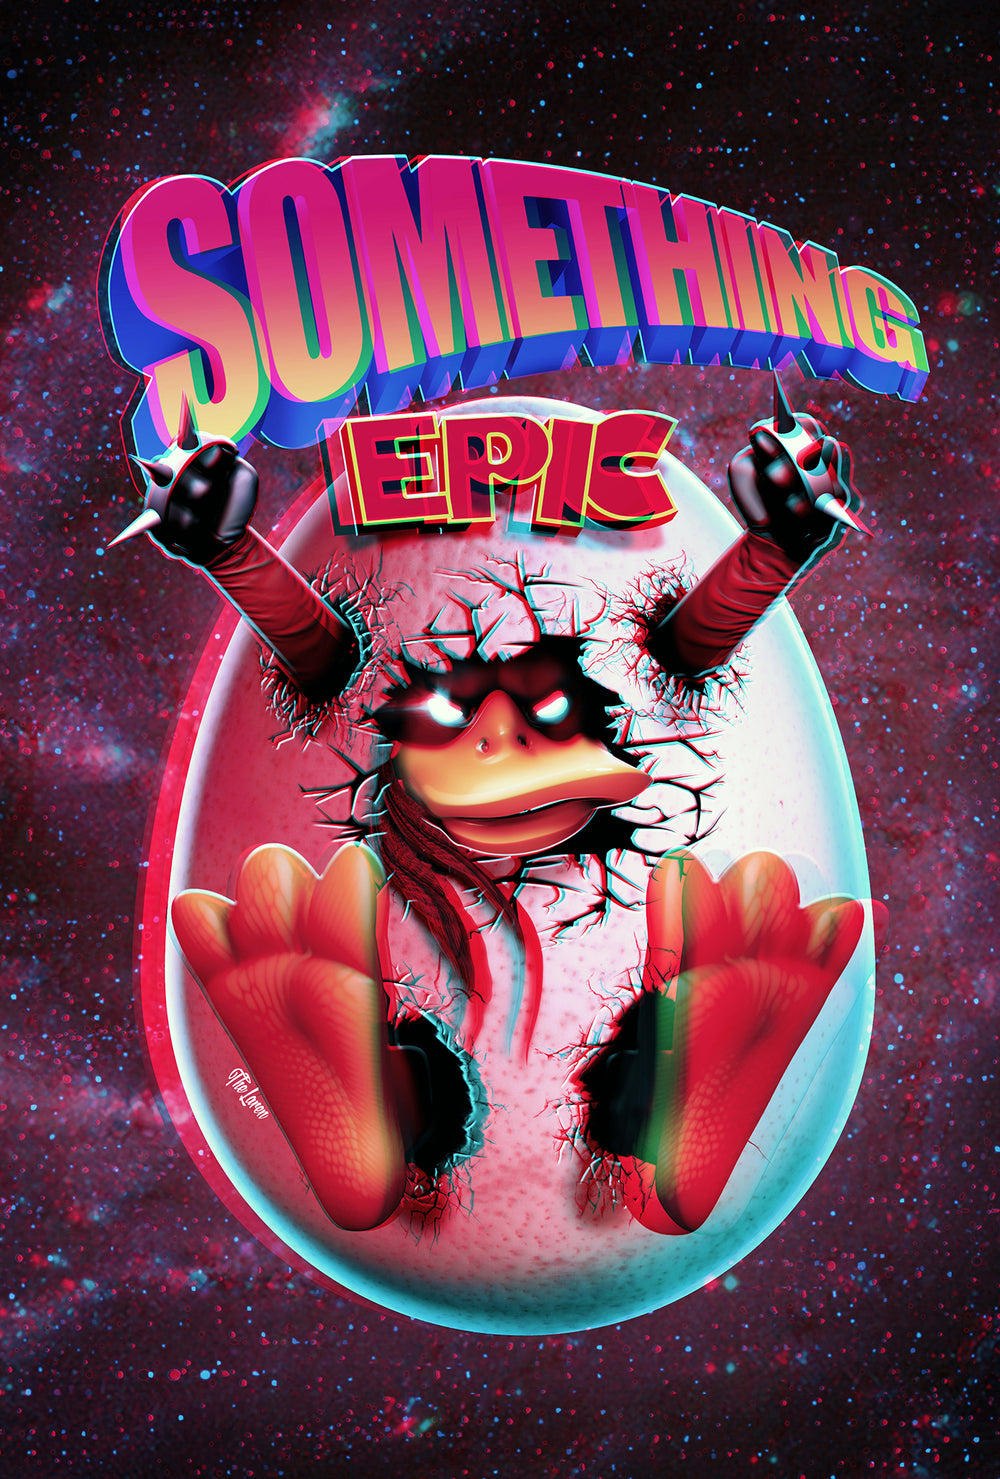 SOMETHING EPIC #1 Hal Laren 3D Exclusive - includes FREE 3D Glasses! (Ltd to ONLY 250)